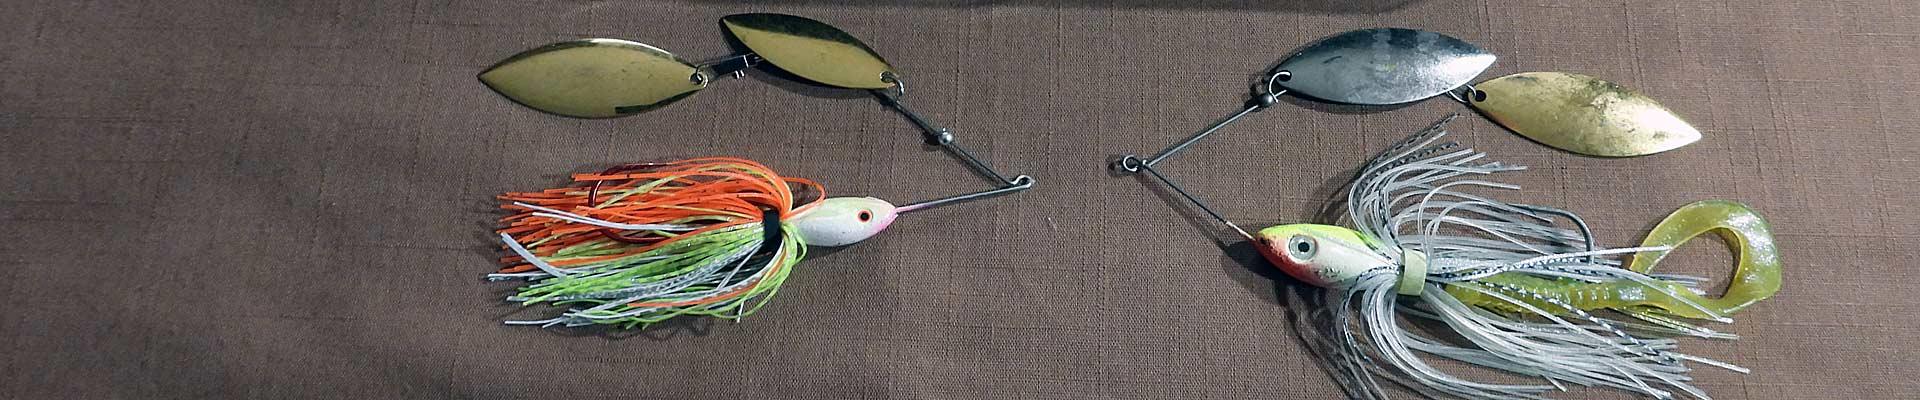 10 Spinnerbait Tips  The Ultimate Bass Fishing Resource Guide® LLC